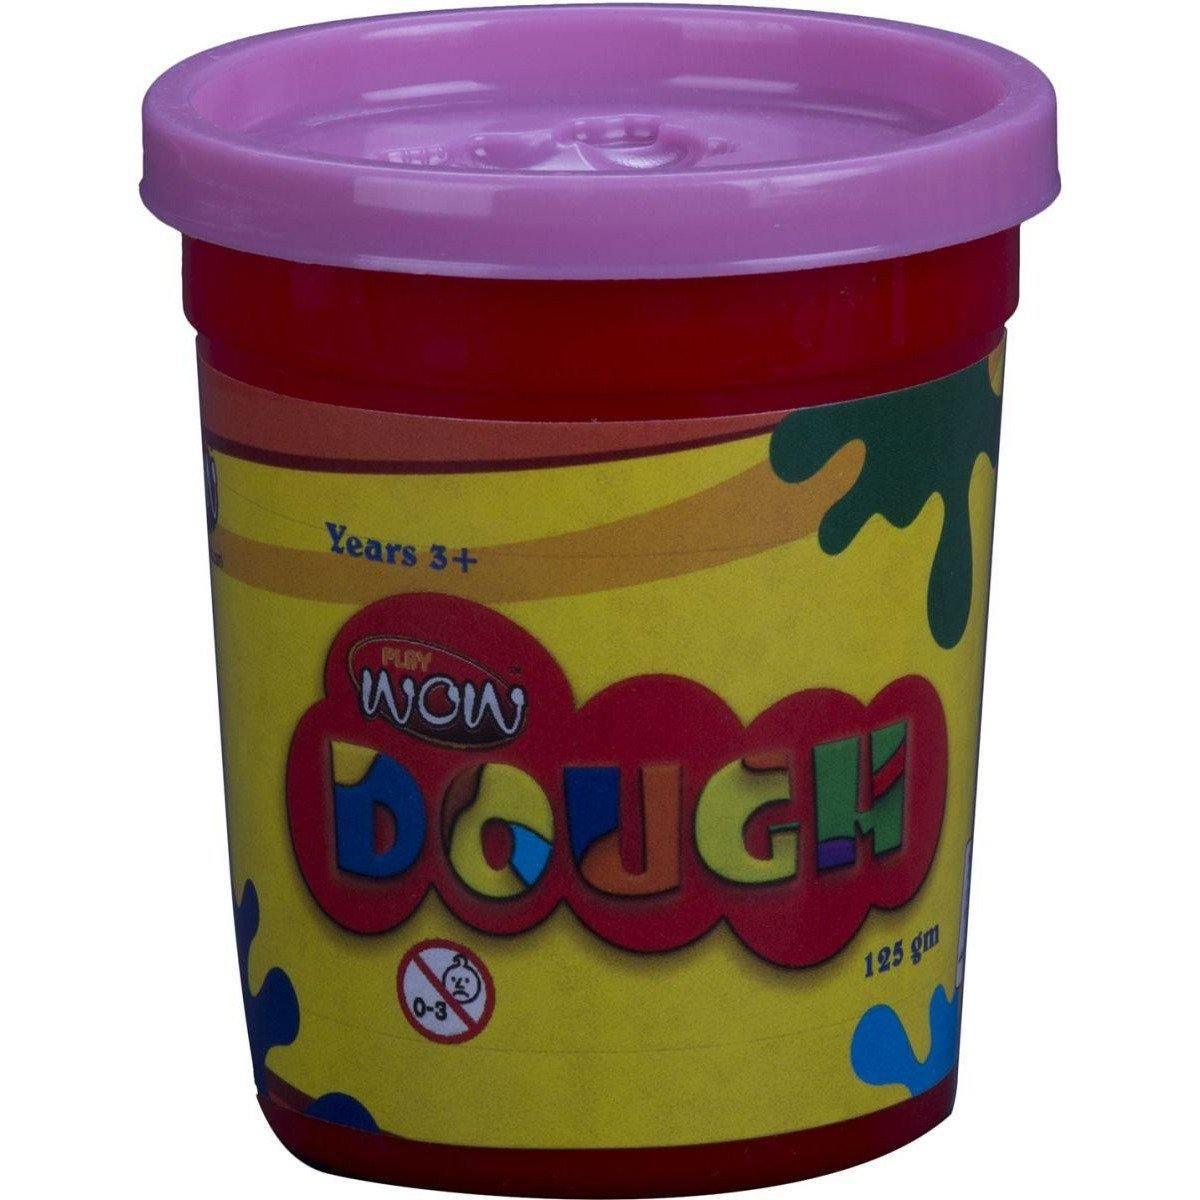 Wow Play Dough Single Can - 125 gm - BumbleToys - 5-7 Years, Arabic Triangle Trading, Make & Create, Play-doh, Unisex